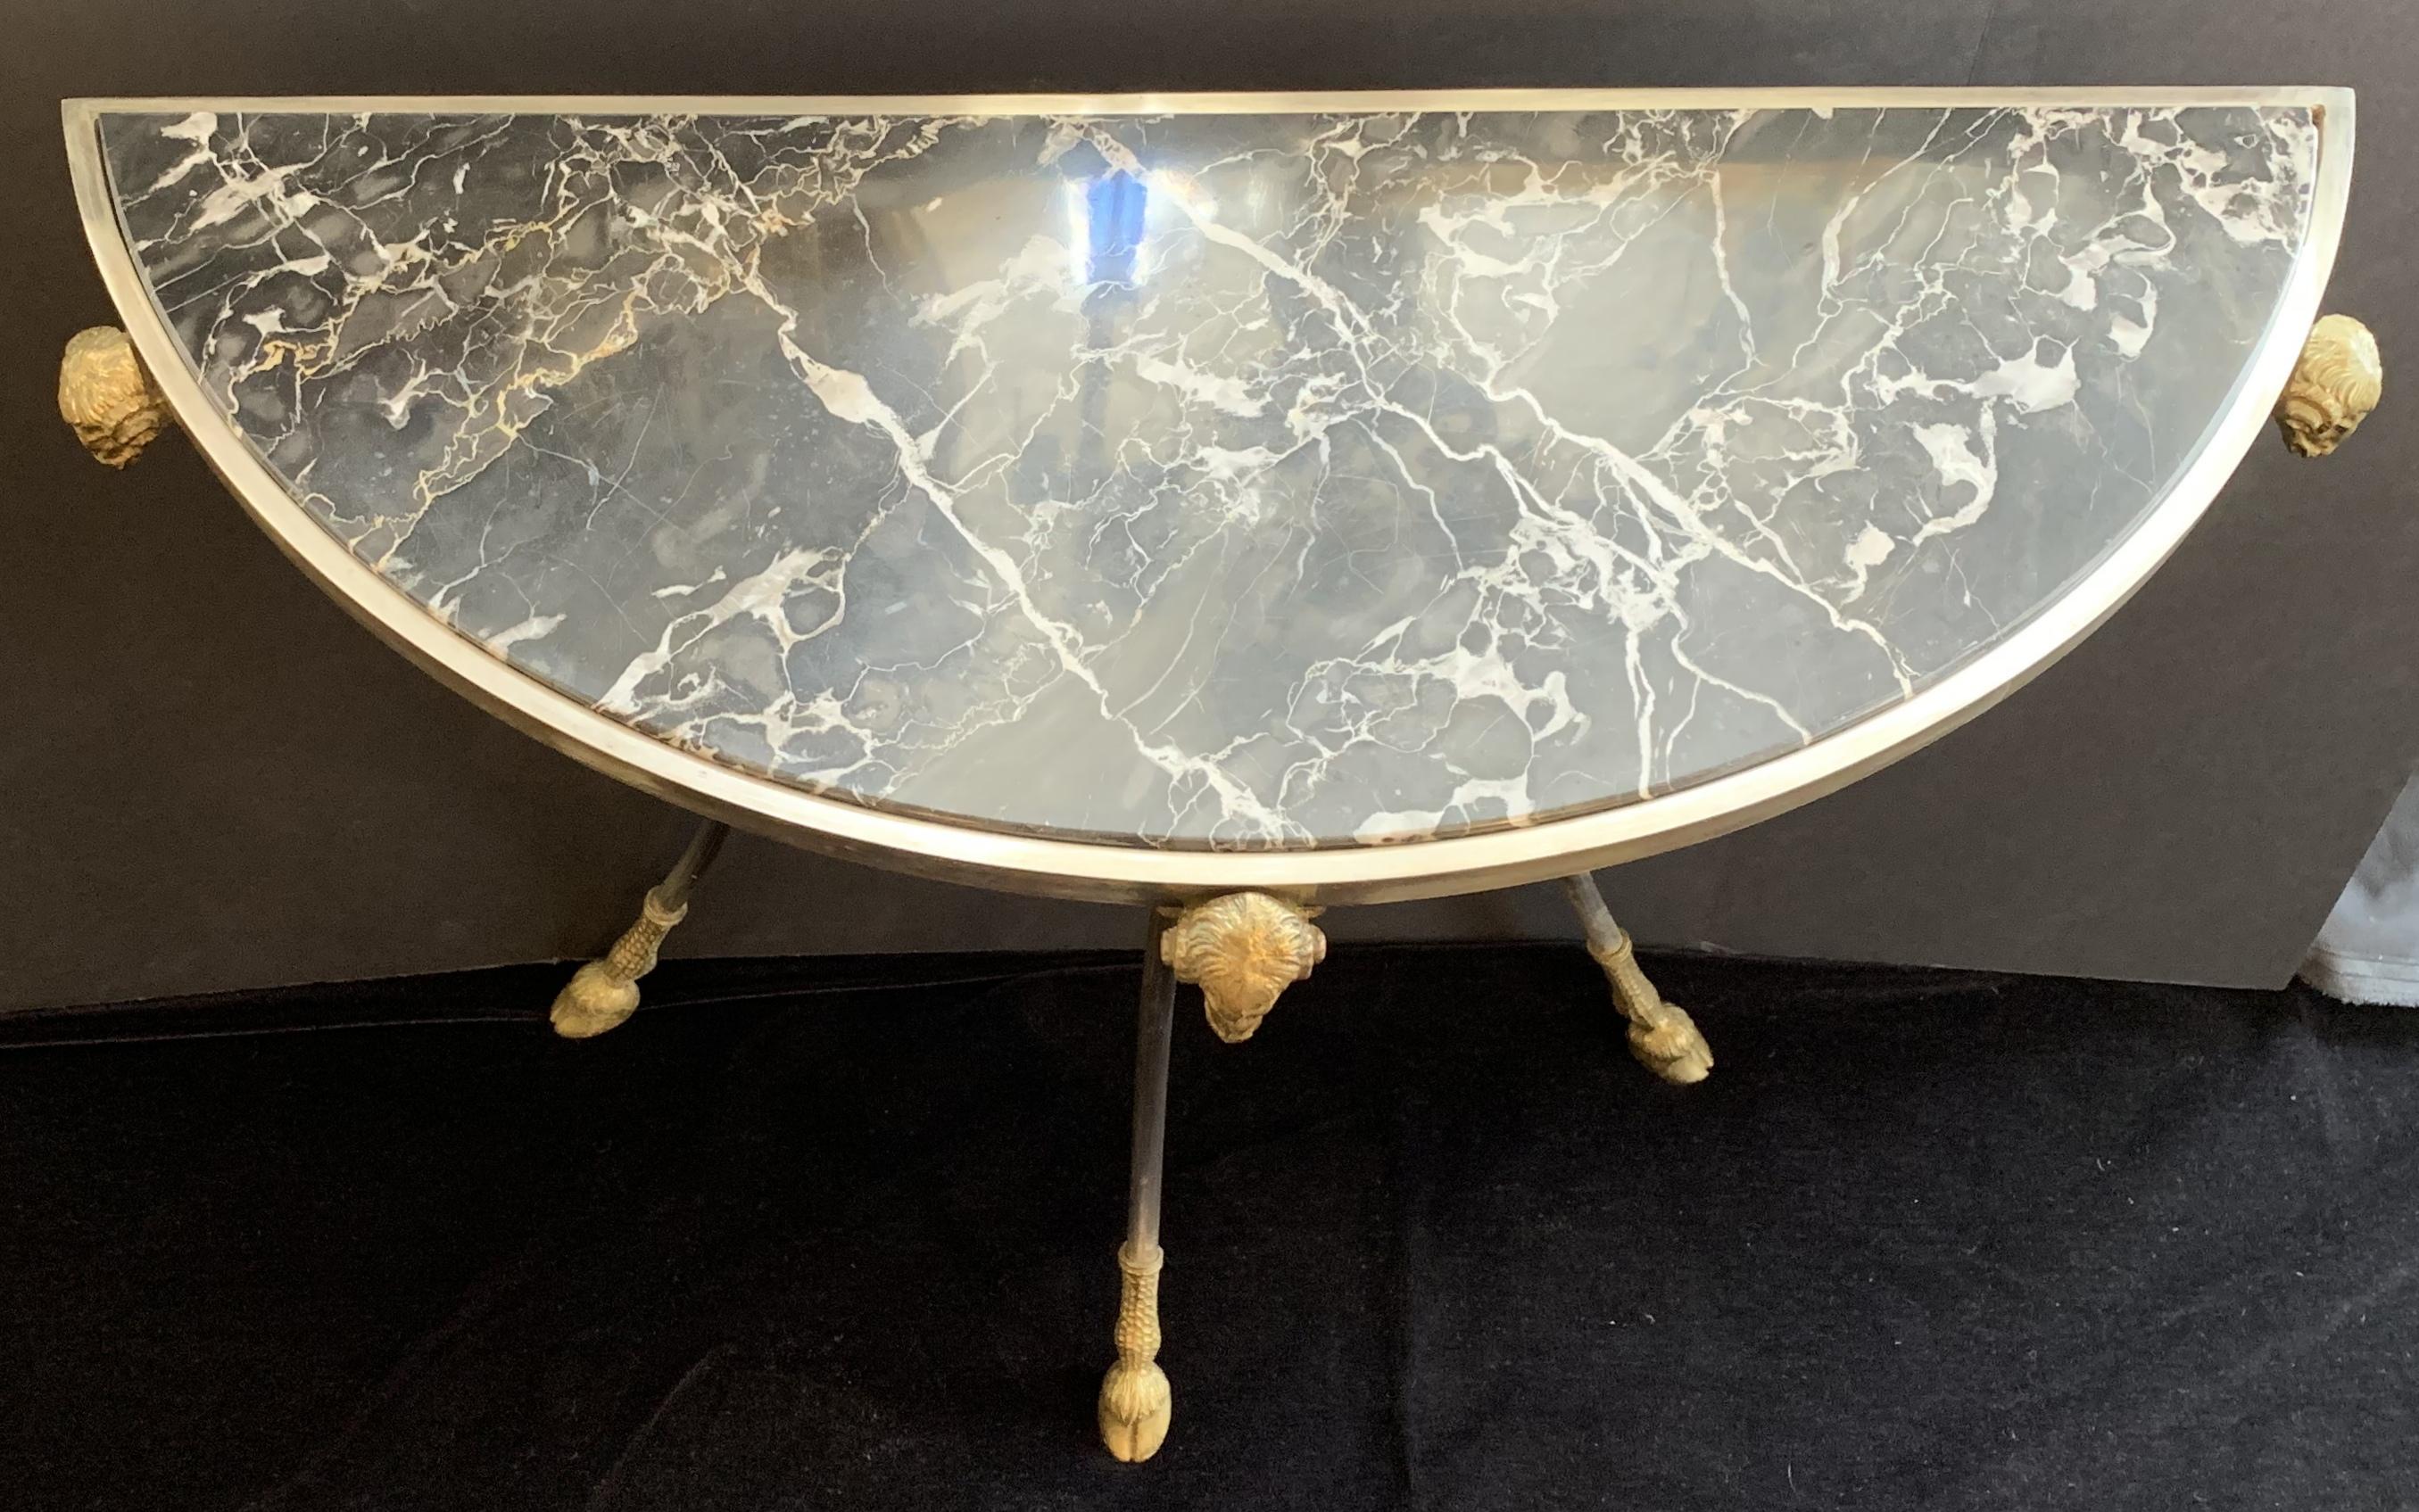 A wonderful pair of Jansen style demilune marble top inset ram's head and foot ormolu-mounted with brushed nickel console tables.